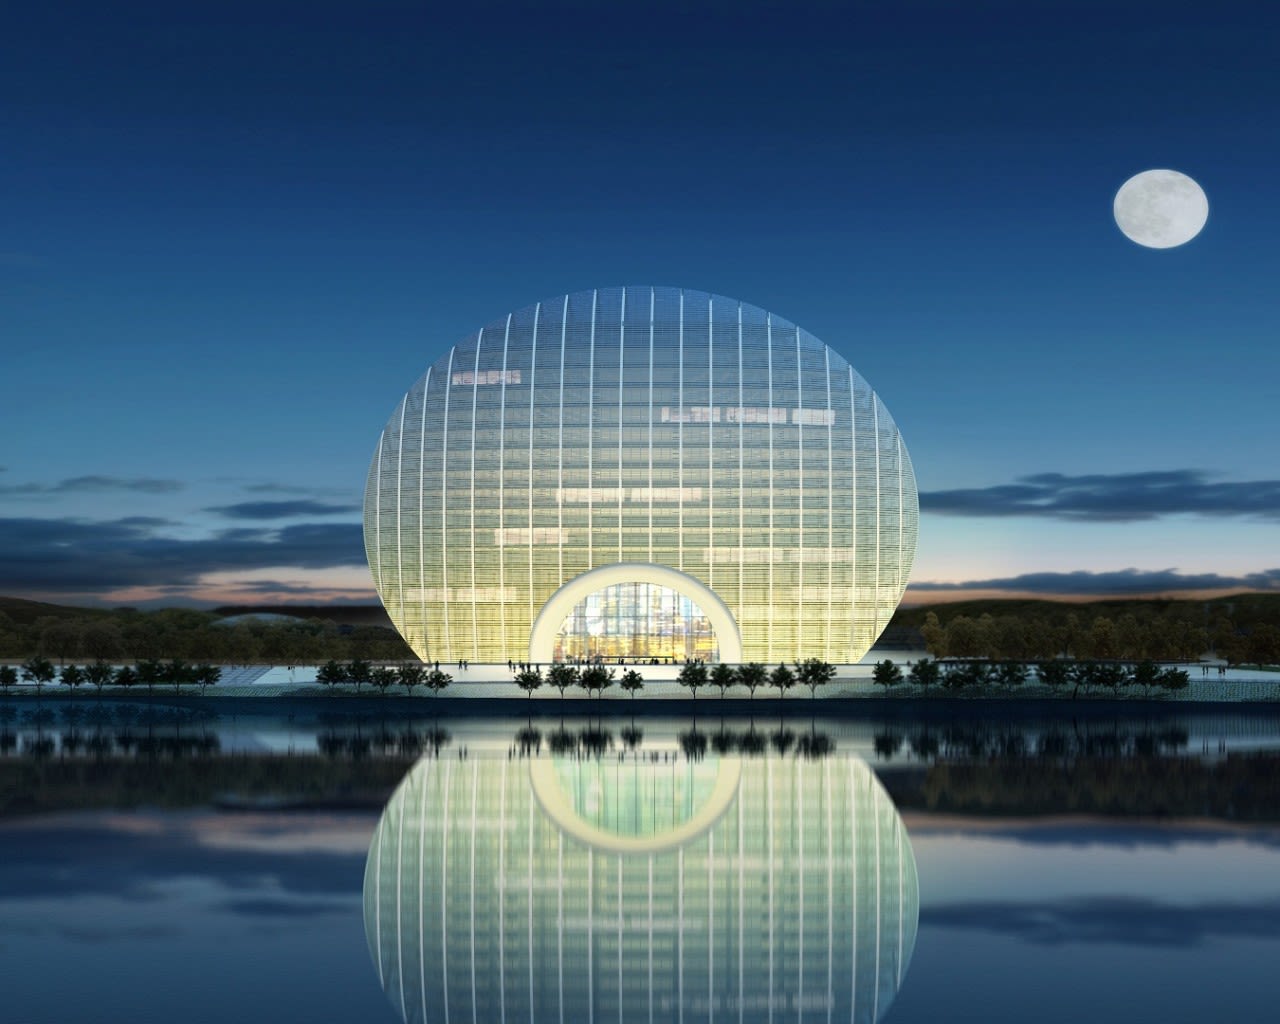 Spanning 18,075 square meters, the new Sunrise Kempinski Hotel, Beijing is covered by more than 10,000 glass panels. At night, it's lit up by hydroelectric-powered LED lights.